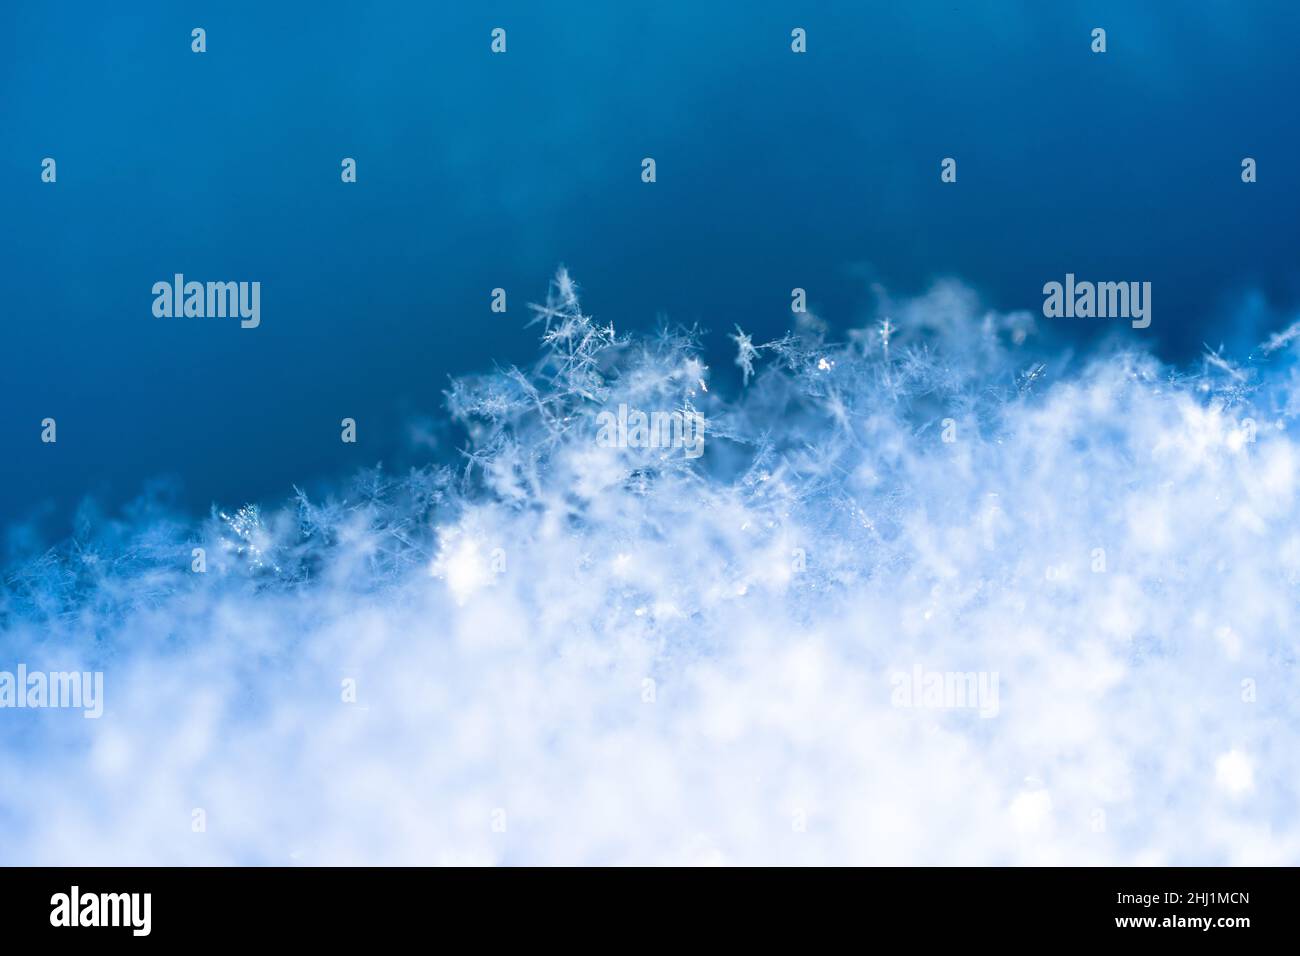 Lots of little snowflakes in the snow, blue background, close up Stock Photo